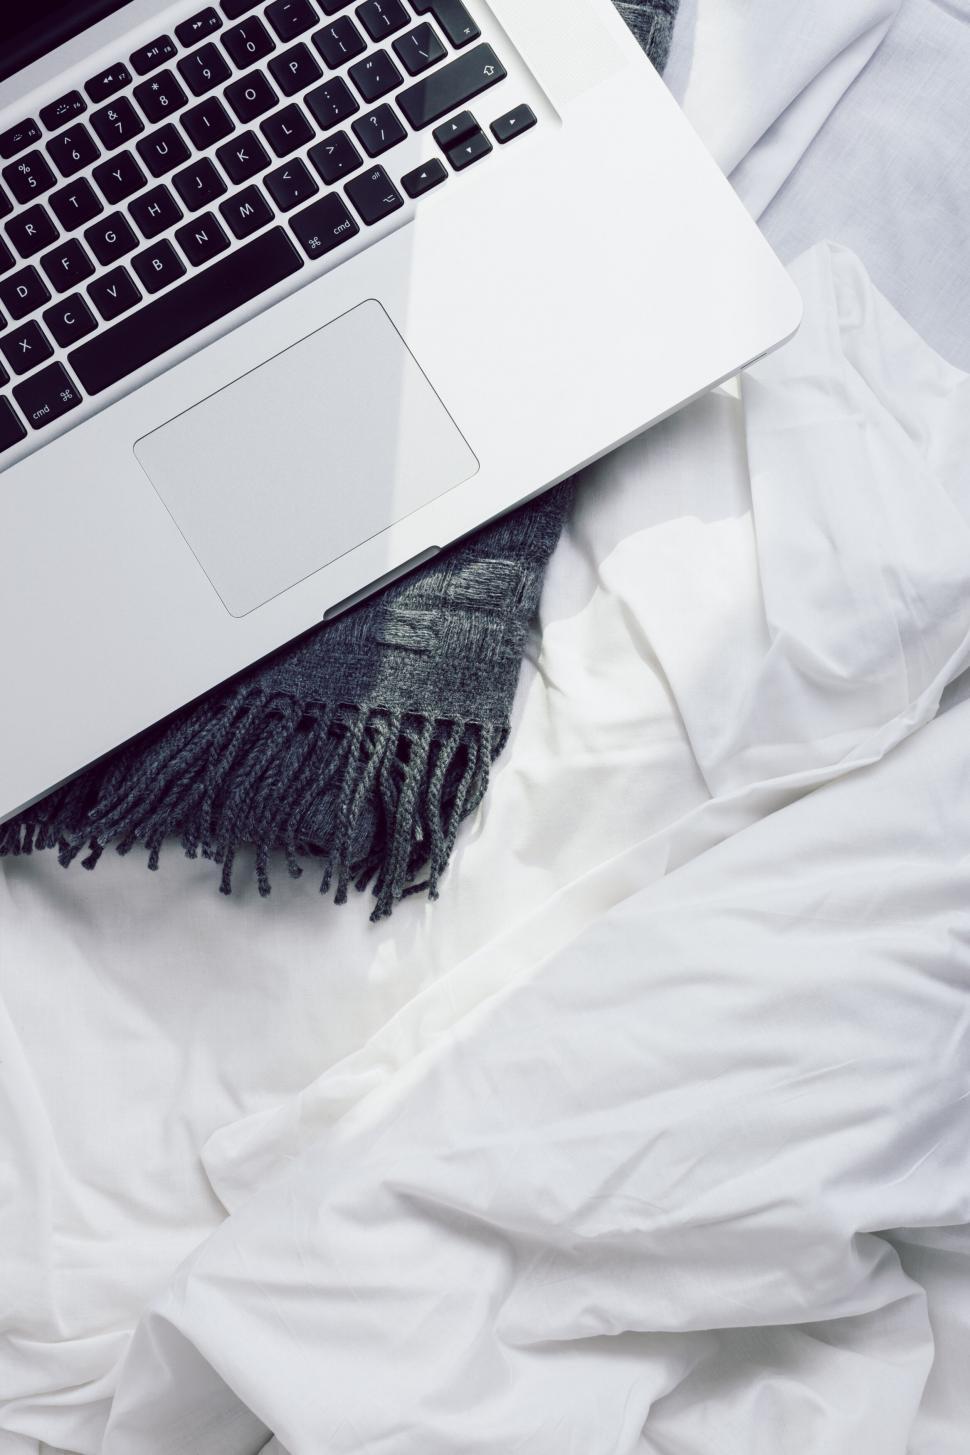 Free Image of Laptop on bed with gray throw and white sheets 